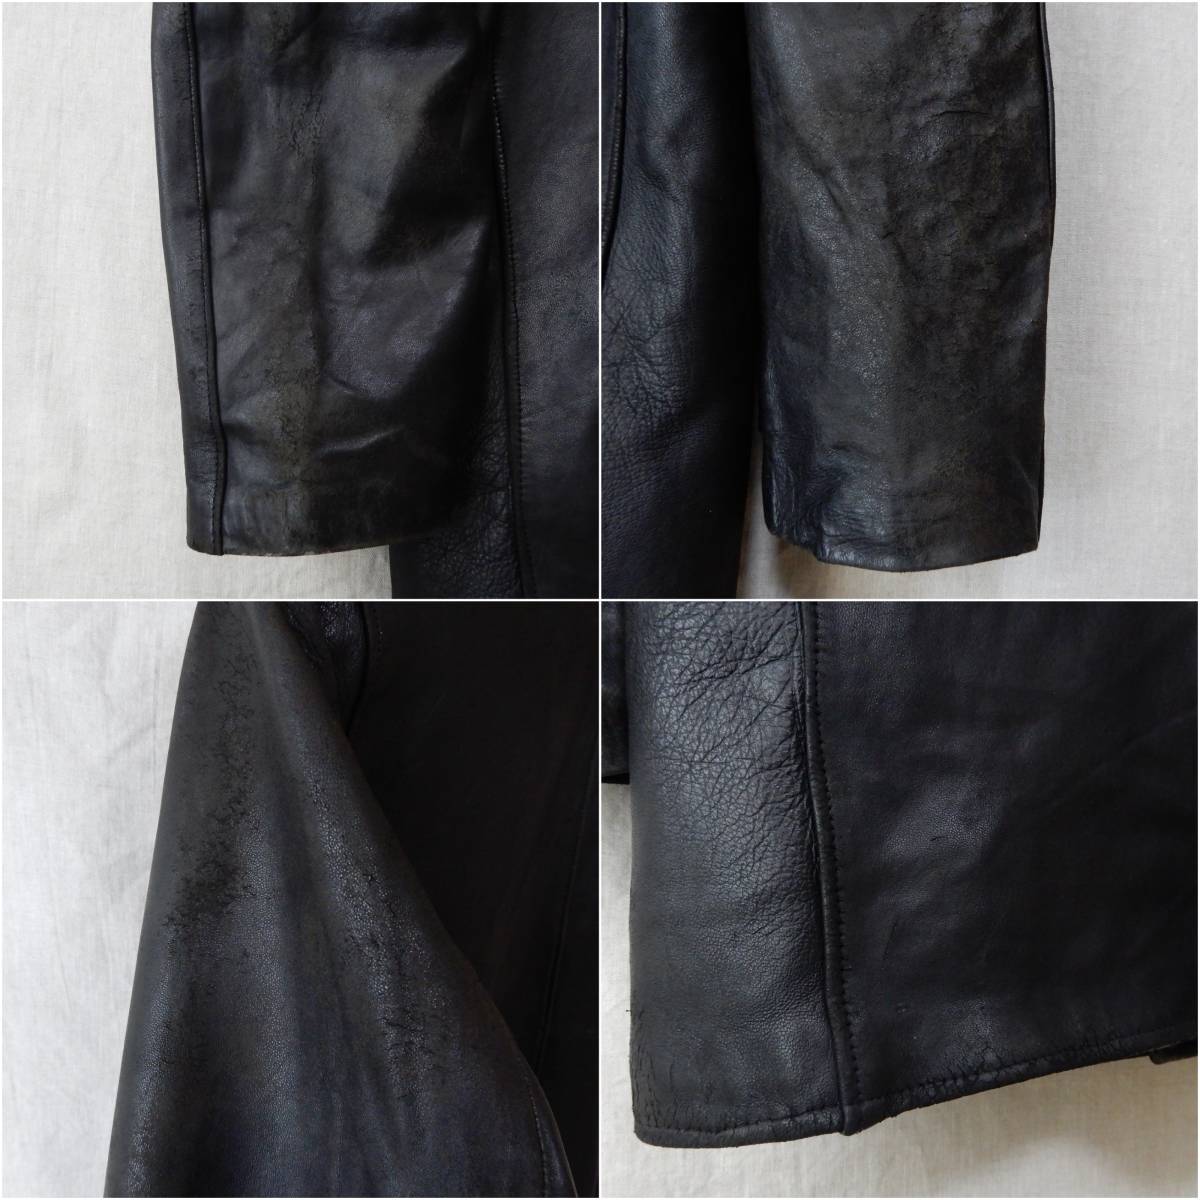 French Work Leather Jacket Black Le Corbusier Jacket Vintage フレンチワーク  レザージャケット ダブルブレスト コルビジェジャケット